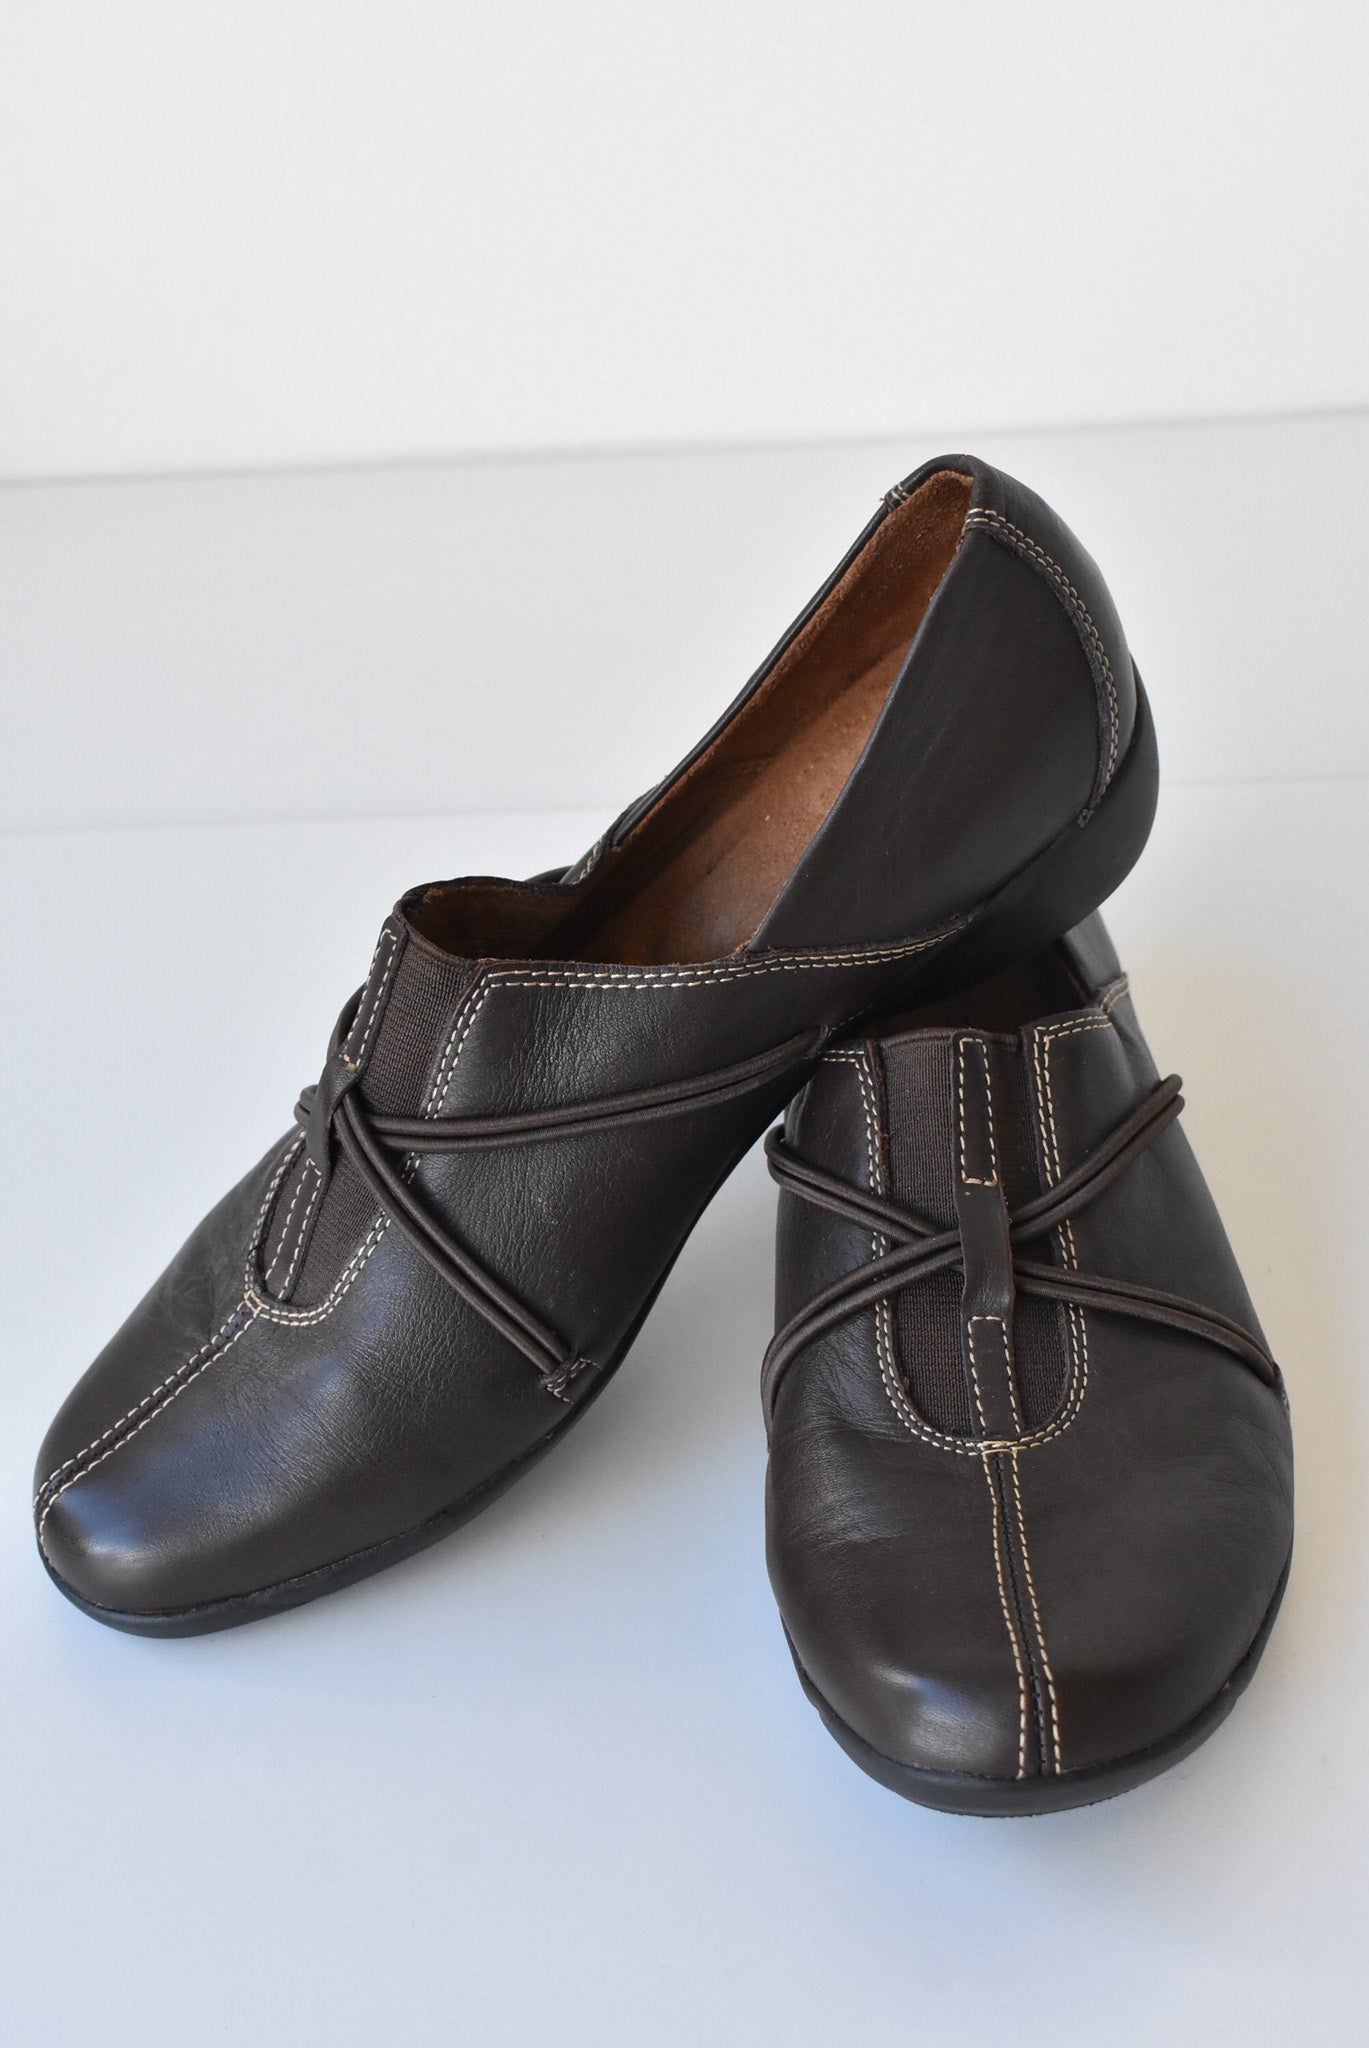 Naturalizer Brown leather shoes, 41